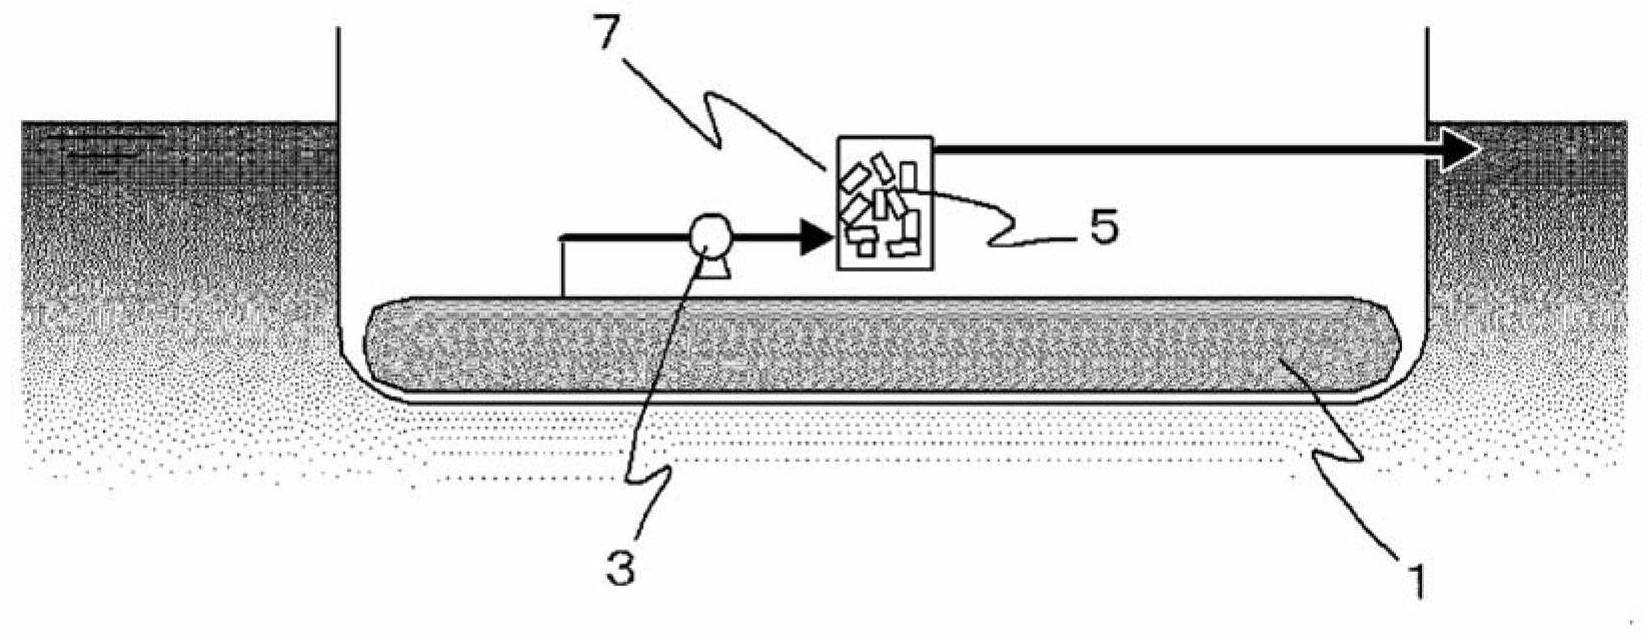 Reduction treatment method for ballast water